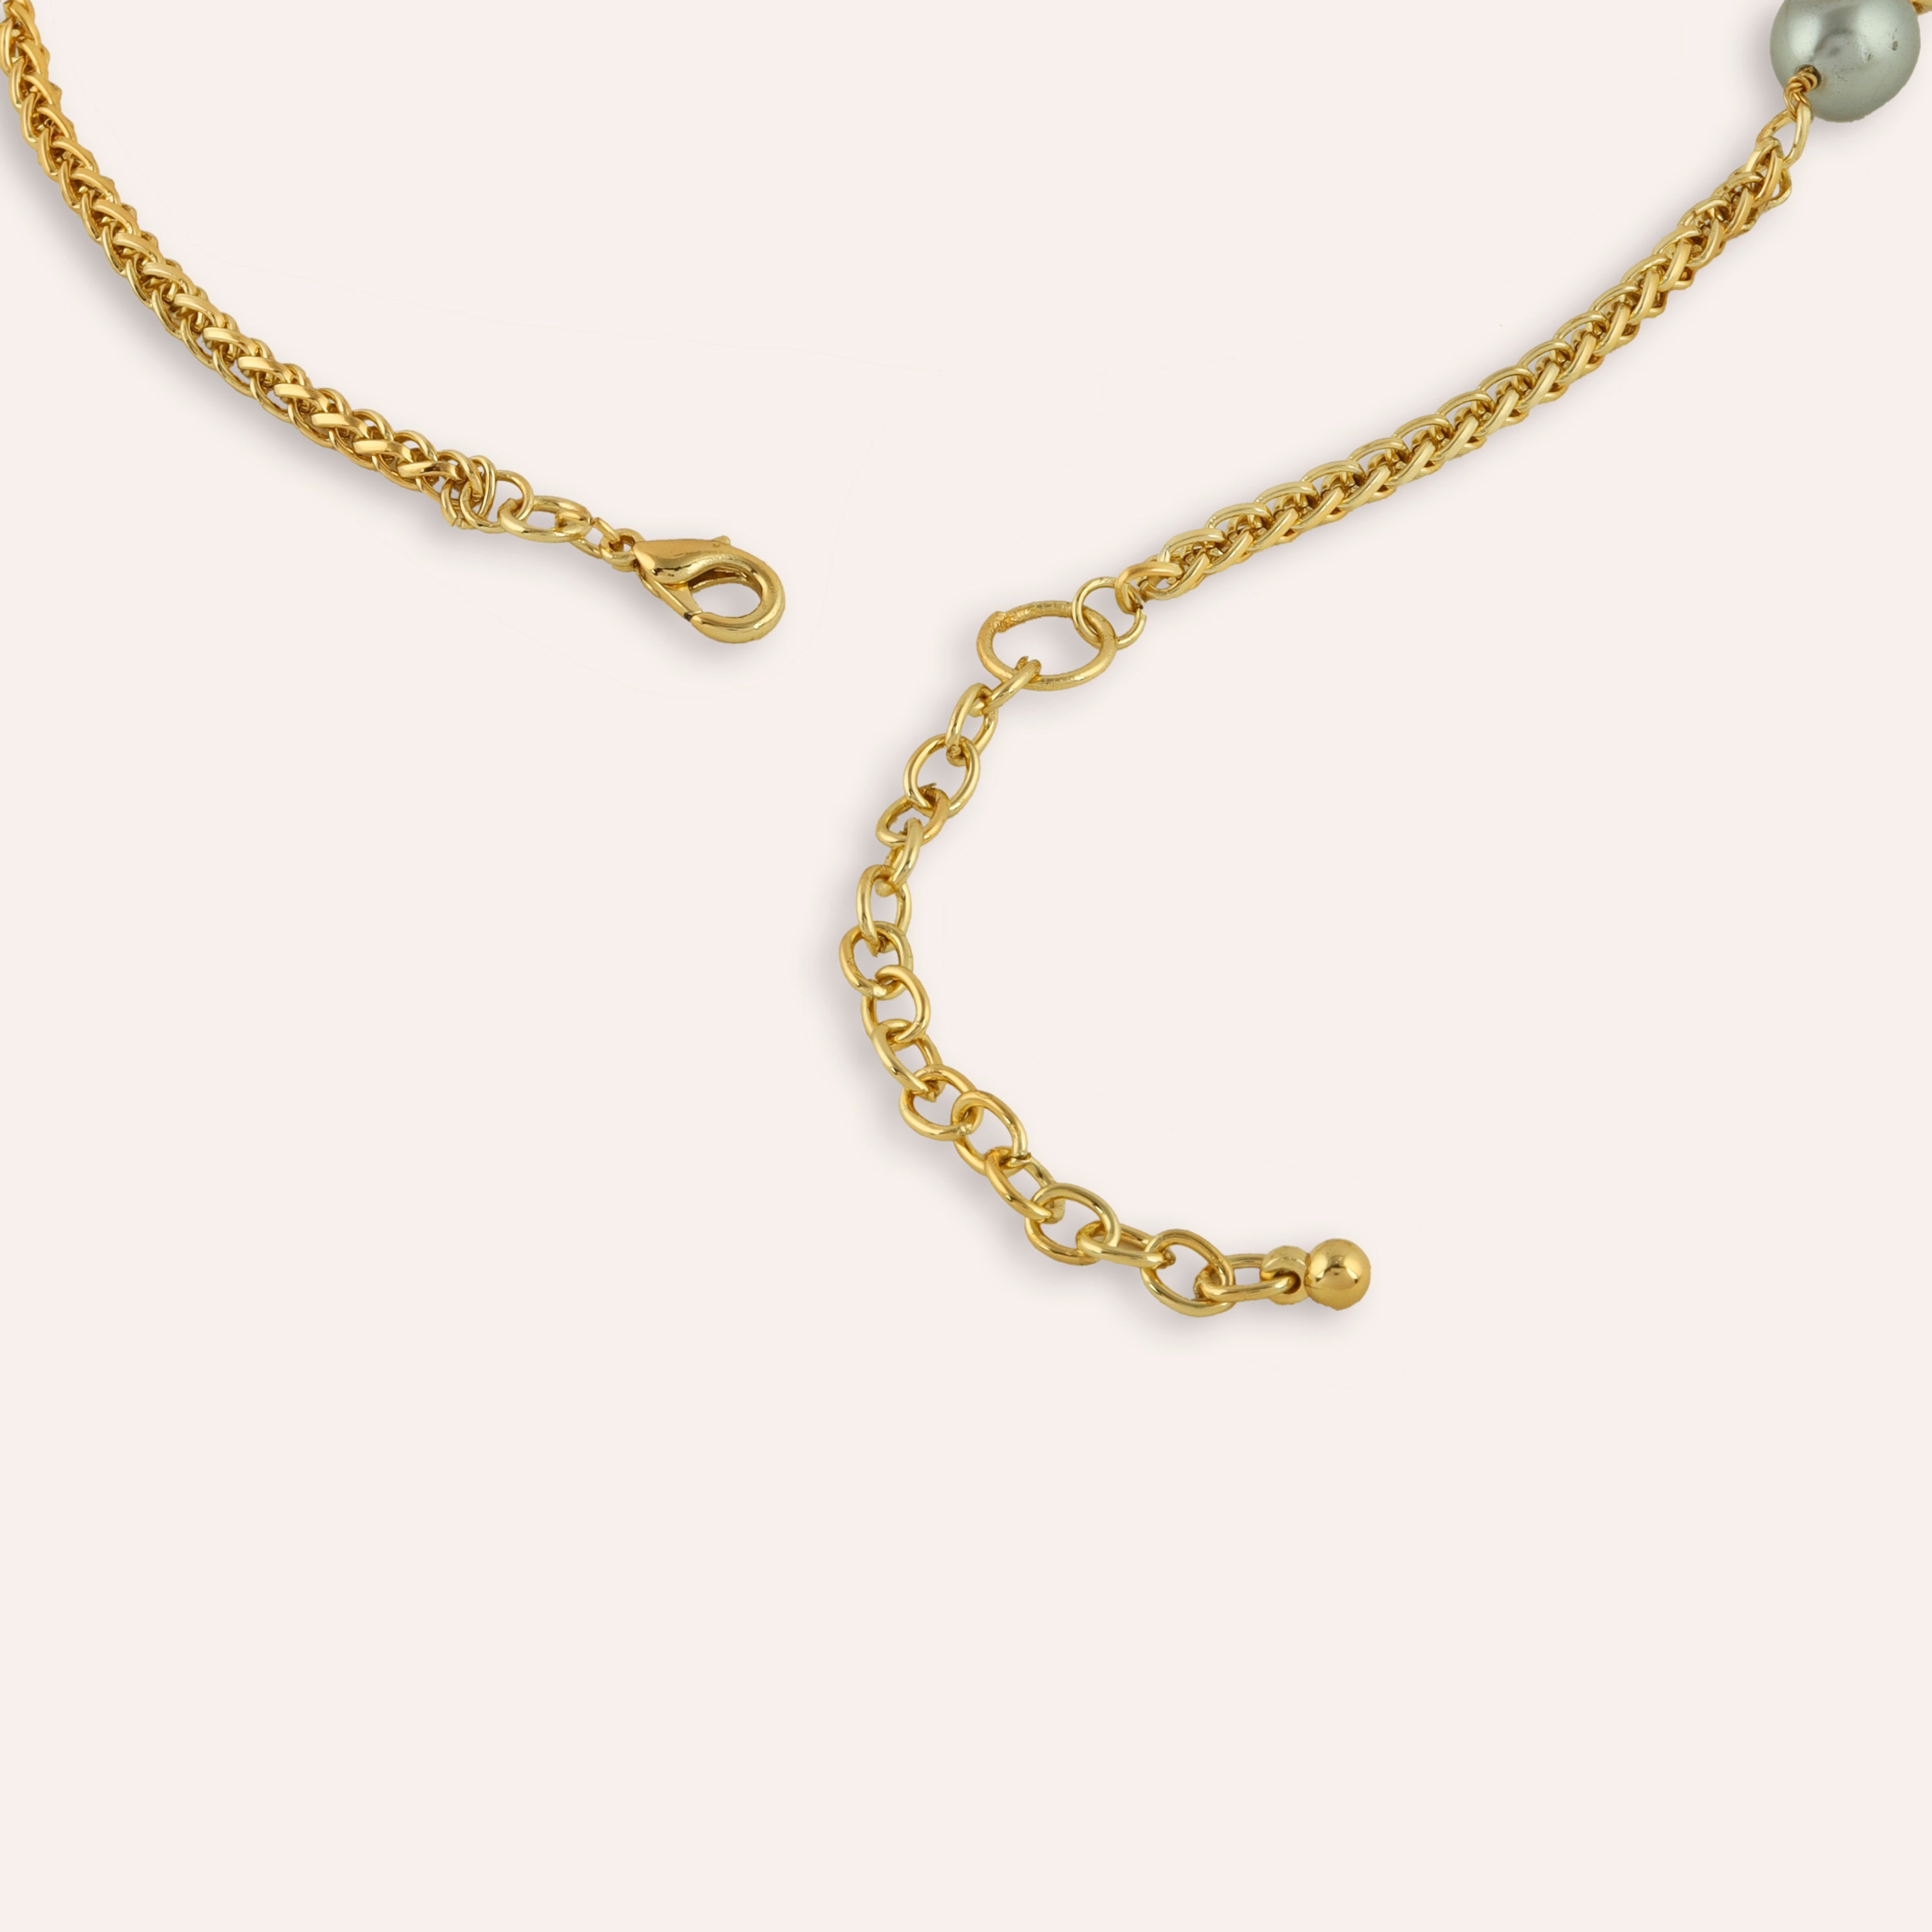 Lovely Dainty Pretty 14K Gold Freshwater Pearl Necklace - Ruby Lane